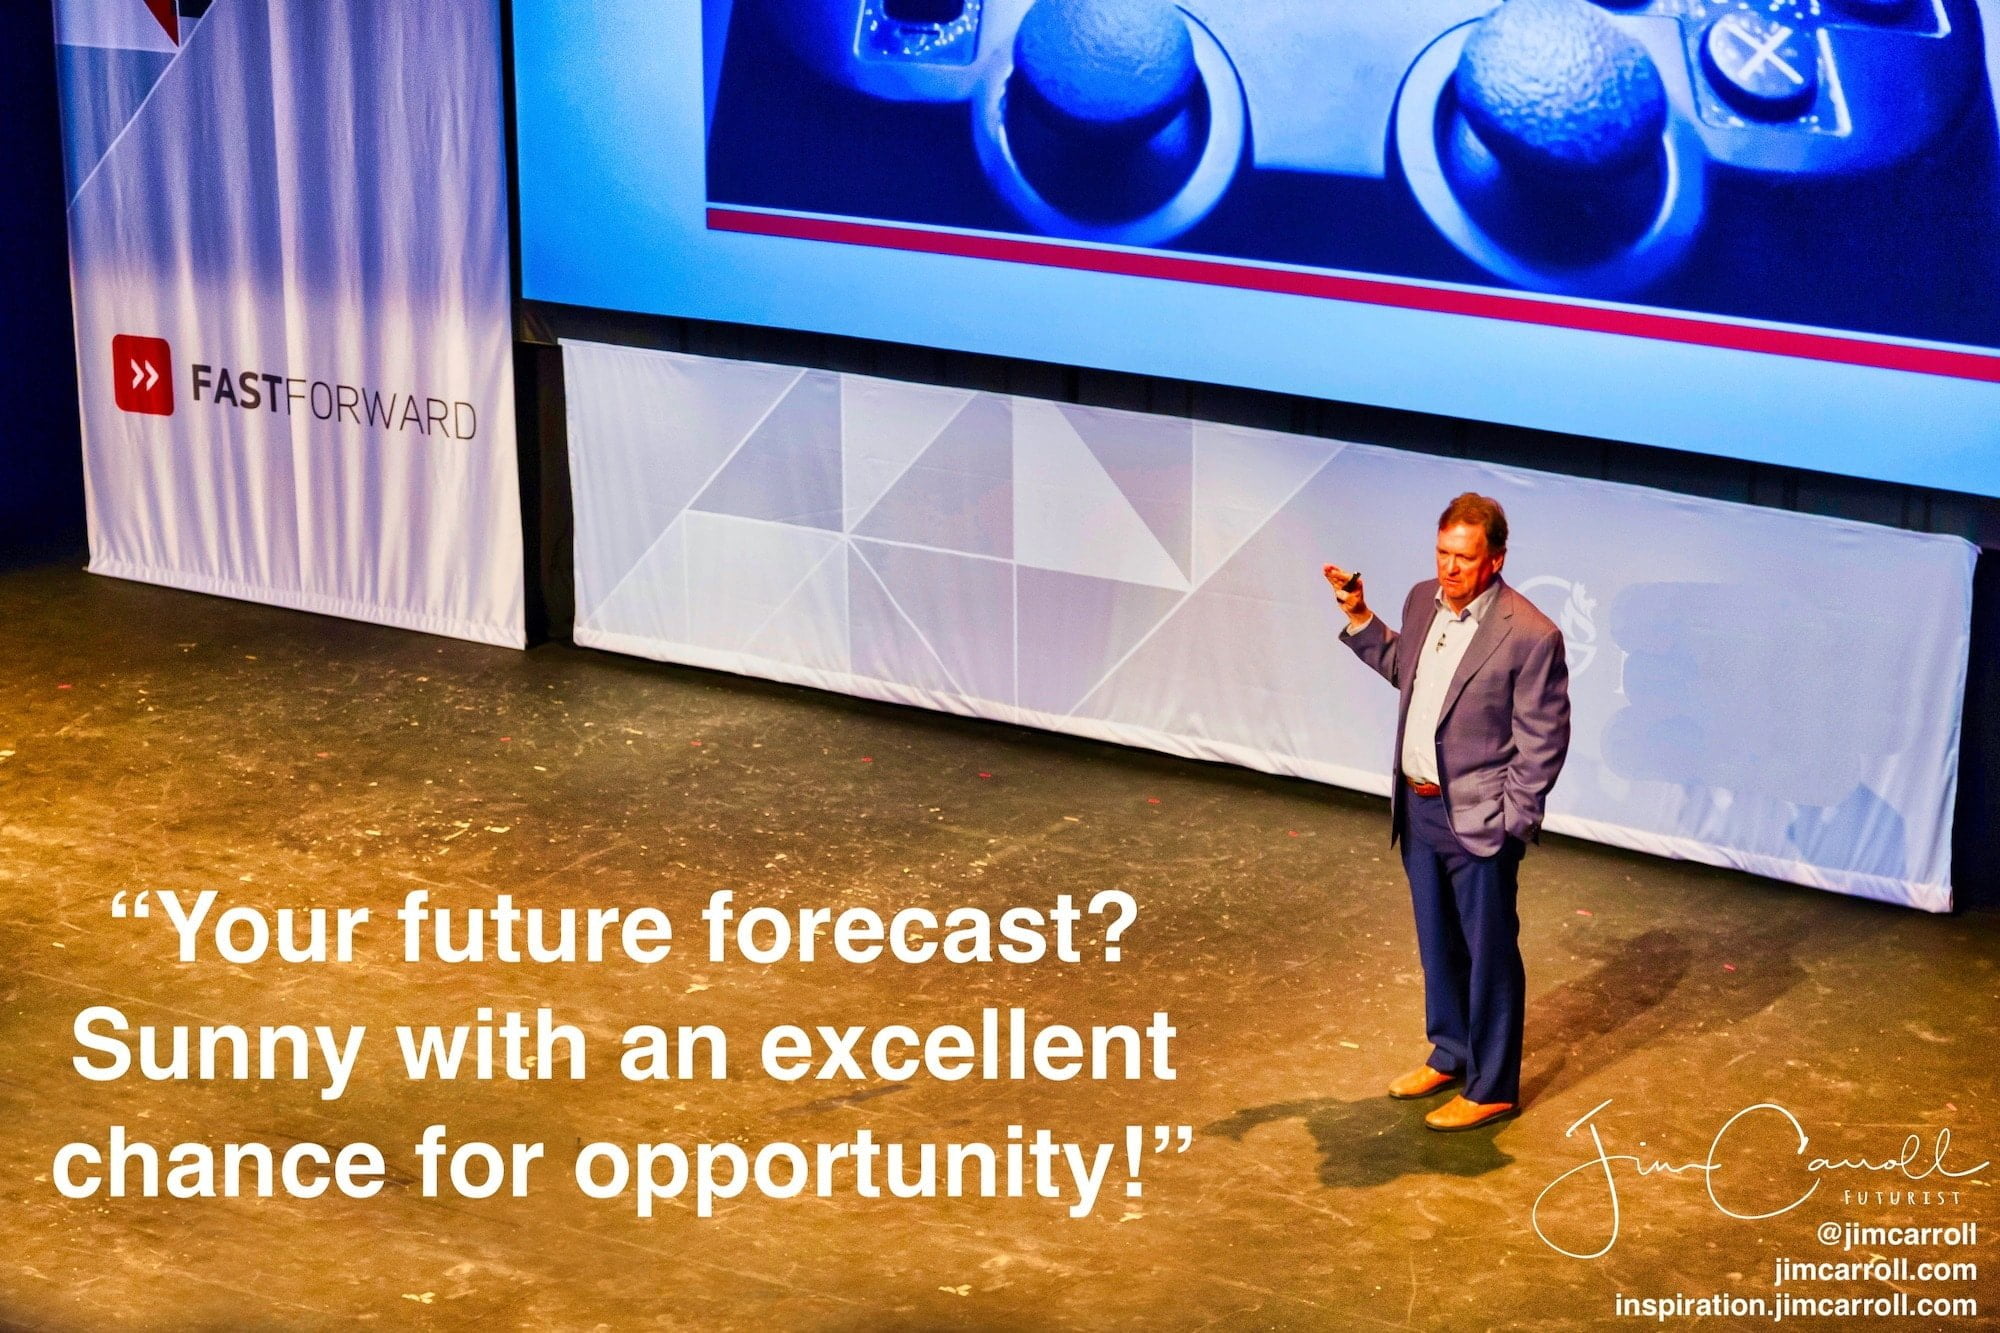 Daily Inspiration: “Your future forecast? Sunny with an excellent chance for opportunity!”